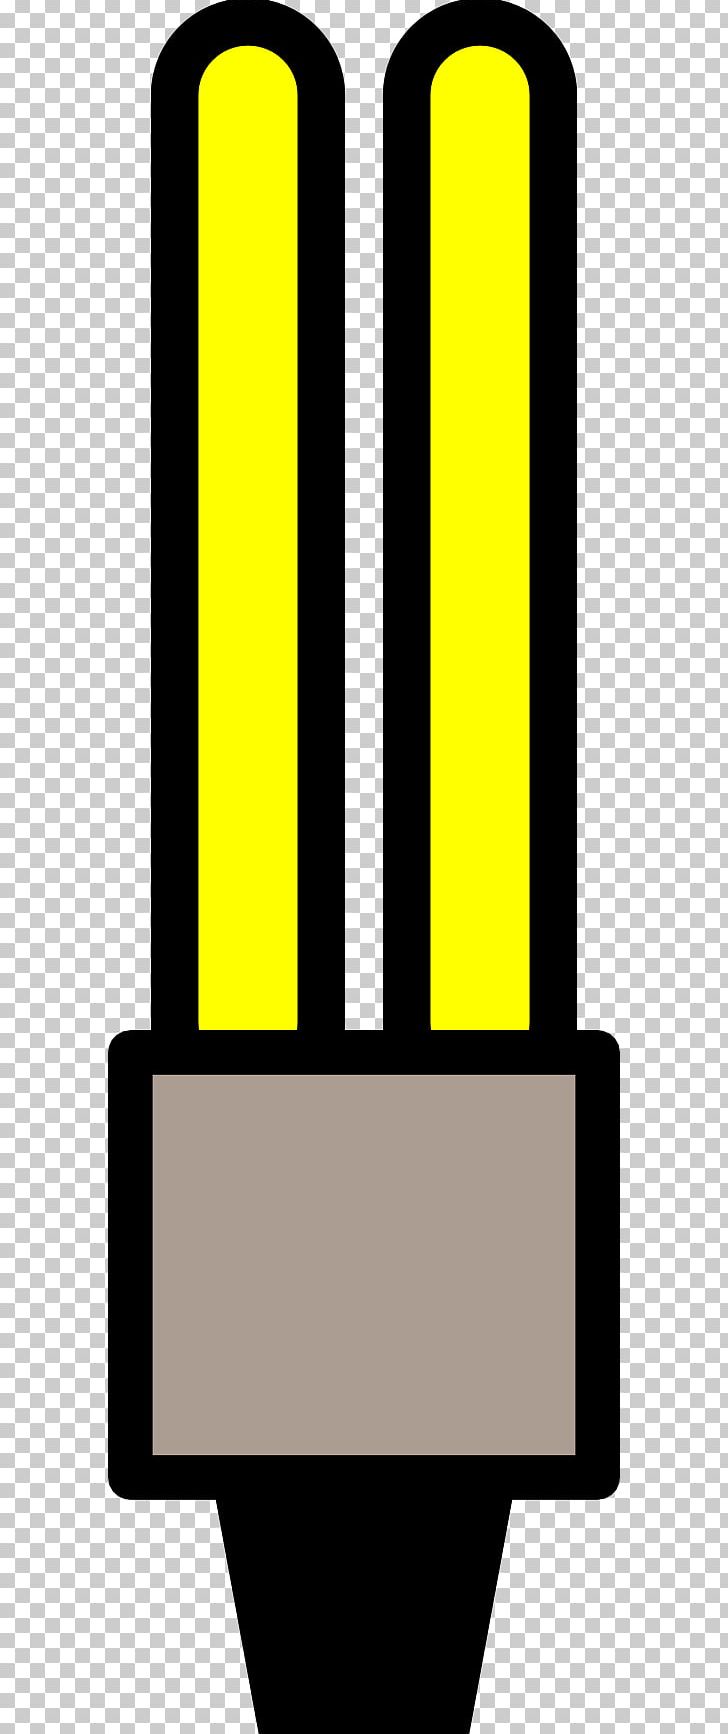 Incandescent Light Bulb Compact Fluorescent Lamp Computer Icons PNG, Clipart, Compact Fluorescent Lamp, Computer Icons, Electrical Energy, Electricity, Electric Light Free PNG Download